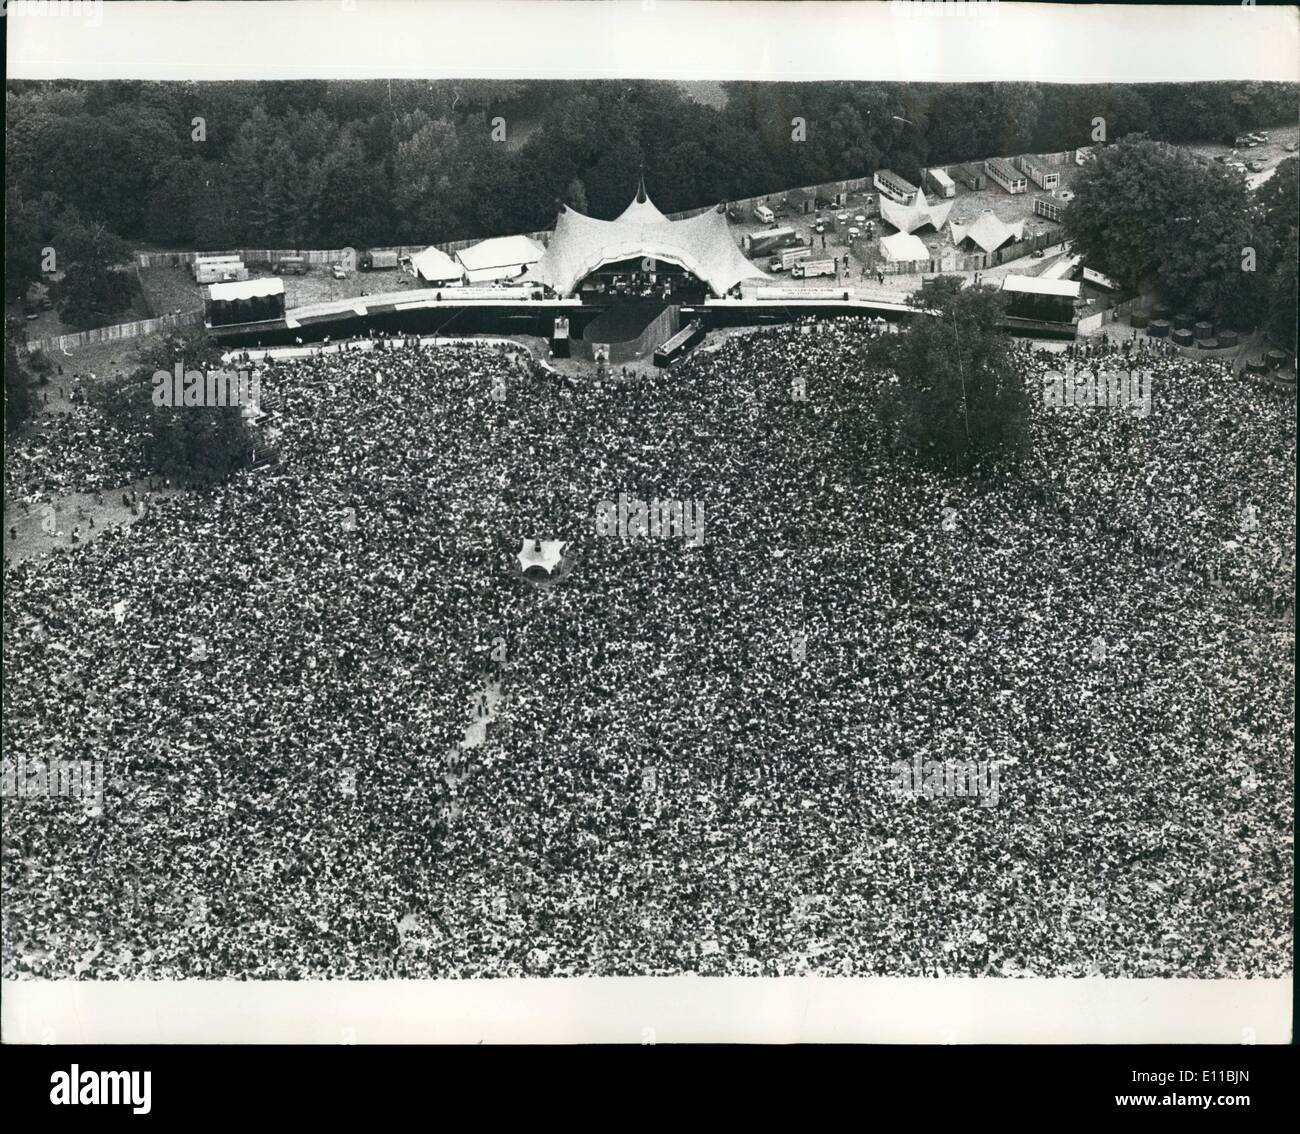 Aug. 08, 1976 - 200,000 fans flock to Kneborth house for the appearance of the Rolling Stones: 200,000 fans of the Rolling Stones, and lover os electronic music, surged into the gounds of Knebworth House, the stately home in ertfordhsire on Satuyday for 12 hours of open-air music and hear the performance of teh Rolling Stones as climax to the Knebworth Fans Rock Extragvanza. The fans were spurred on by rumours taht the legendary rock group were playing their last concert Stock Photo